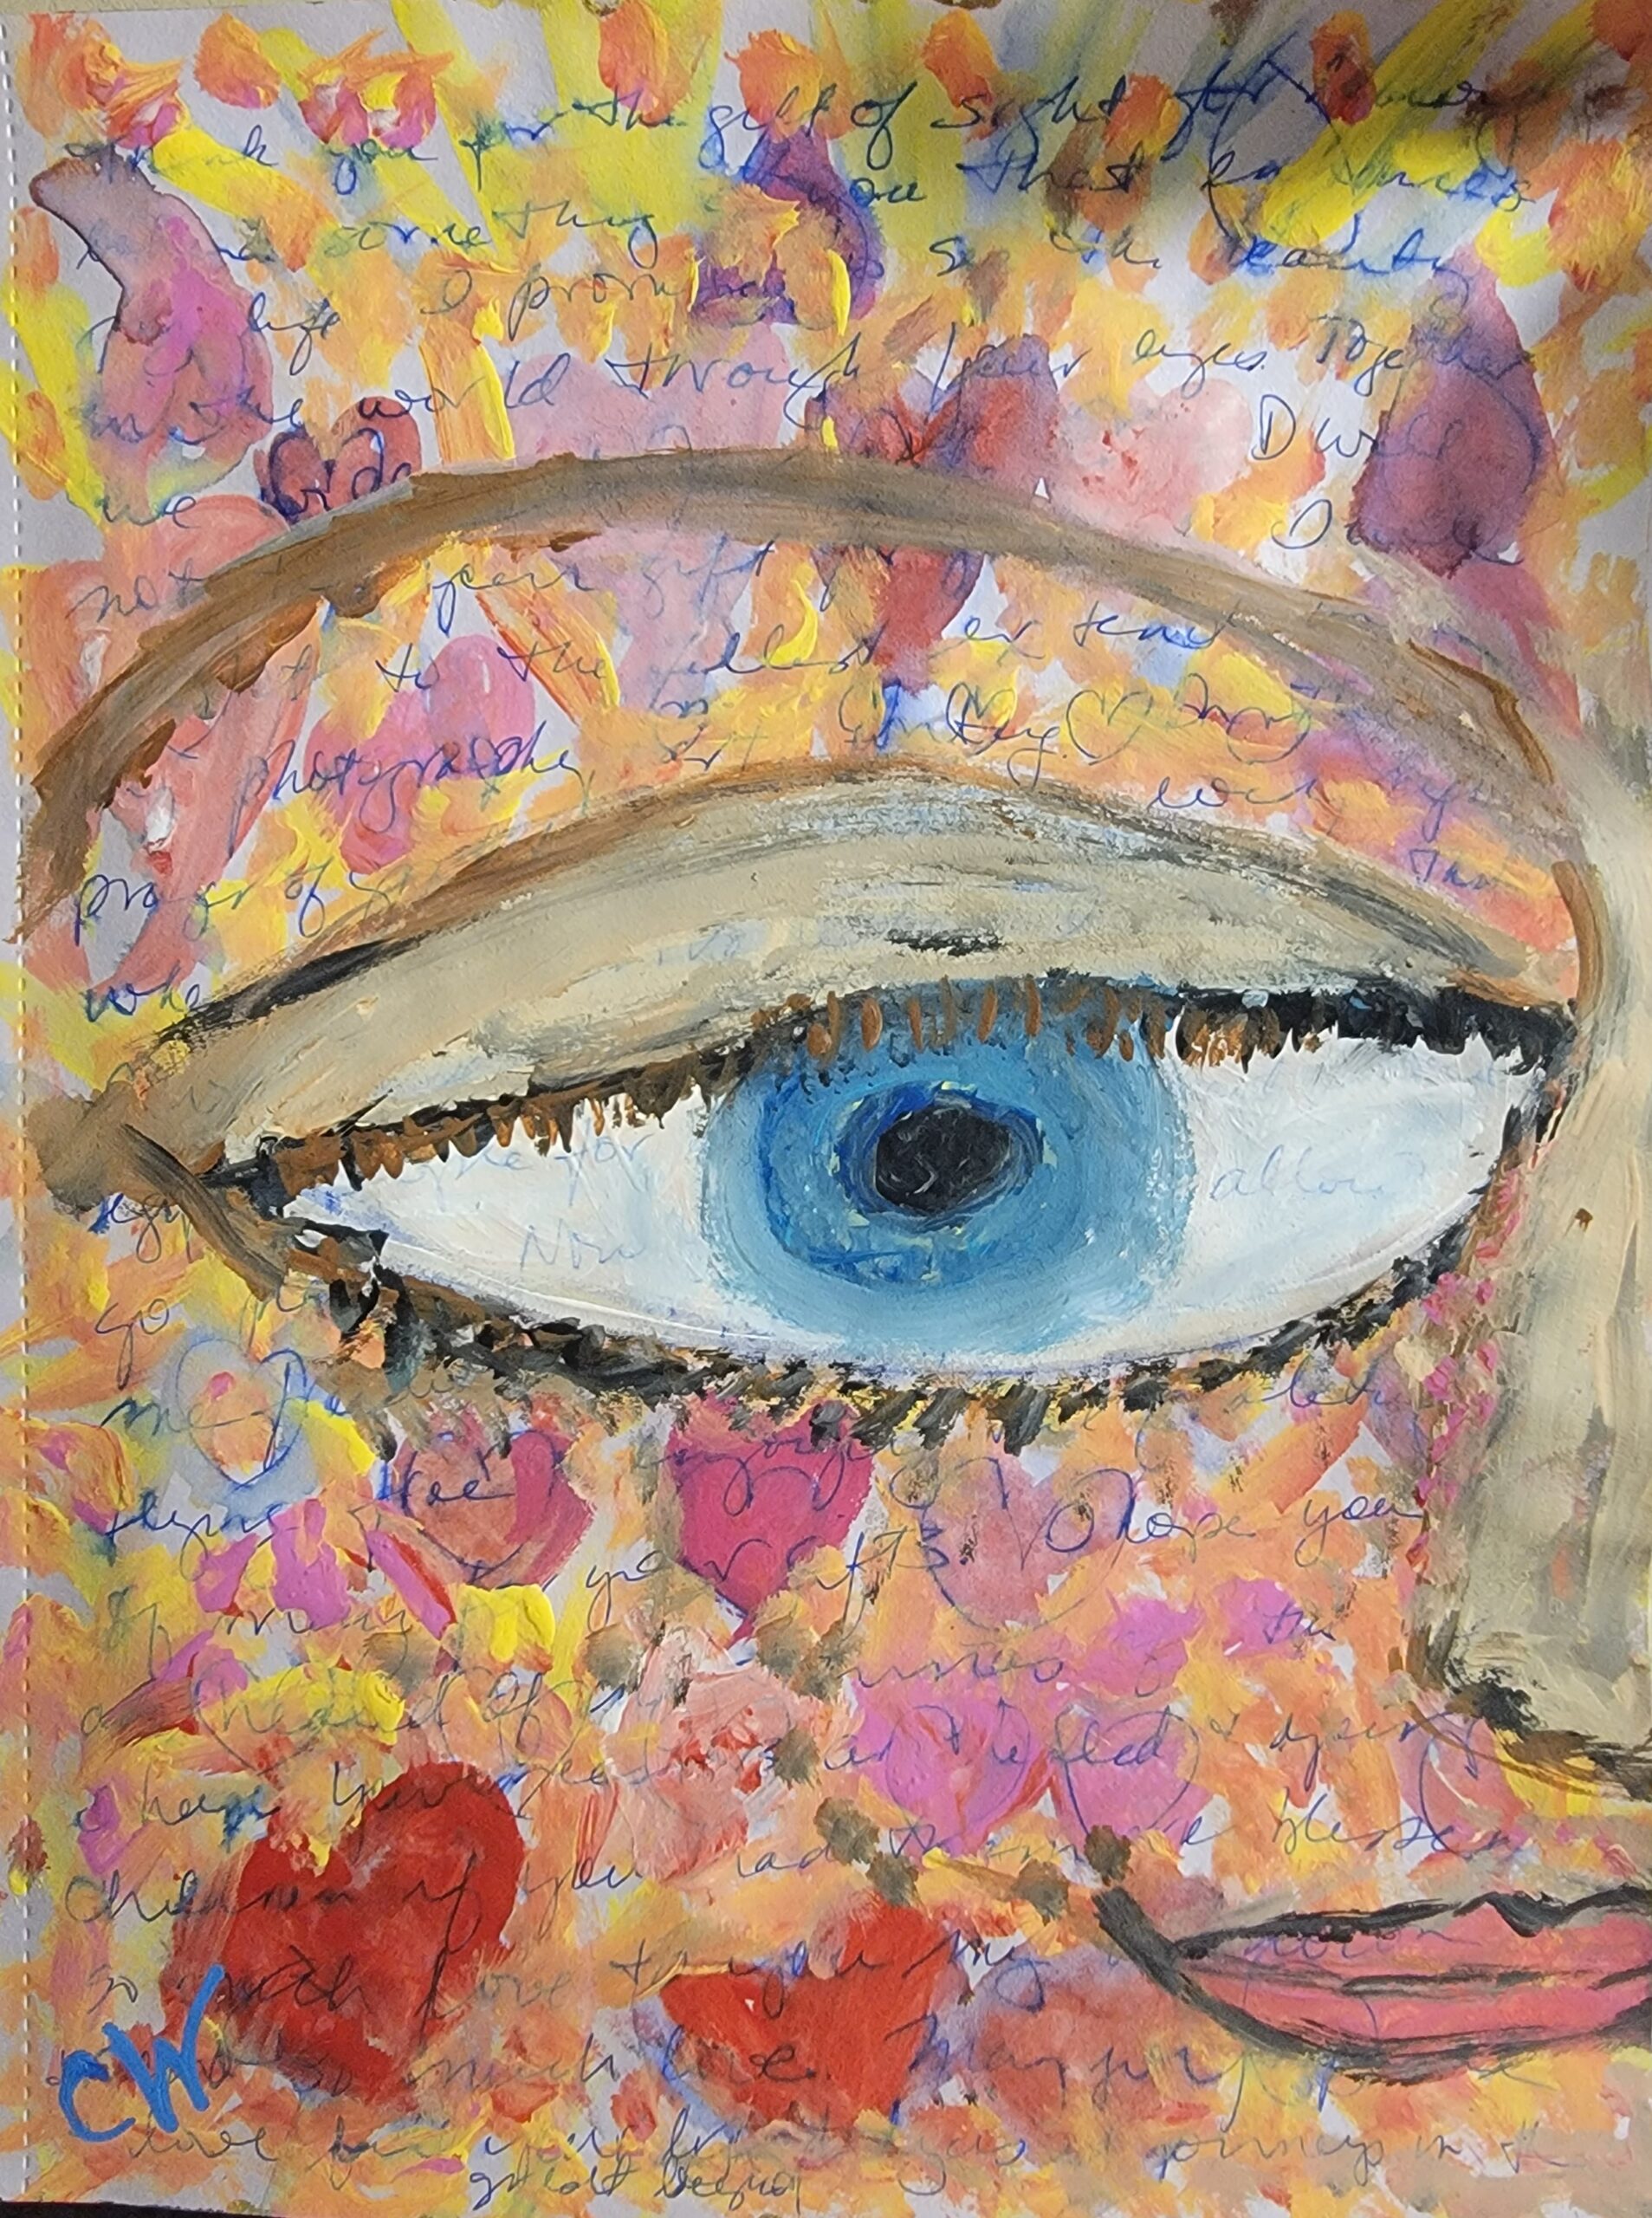 Painiting of an eye/face with hearts